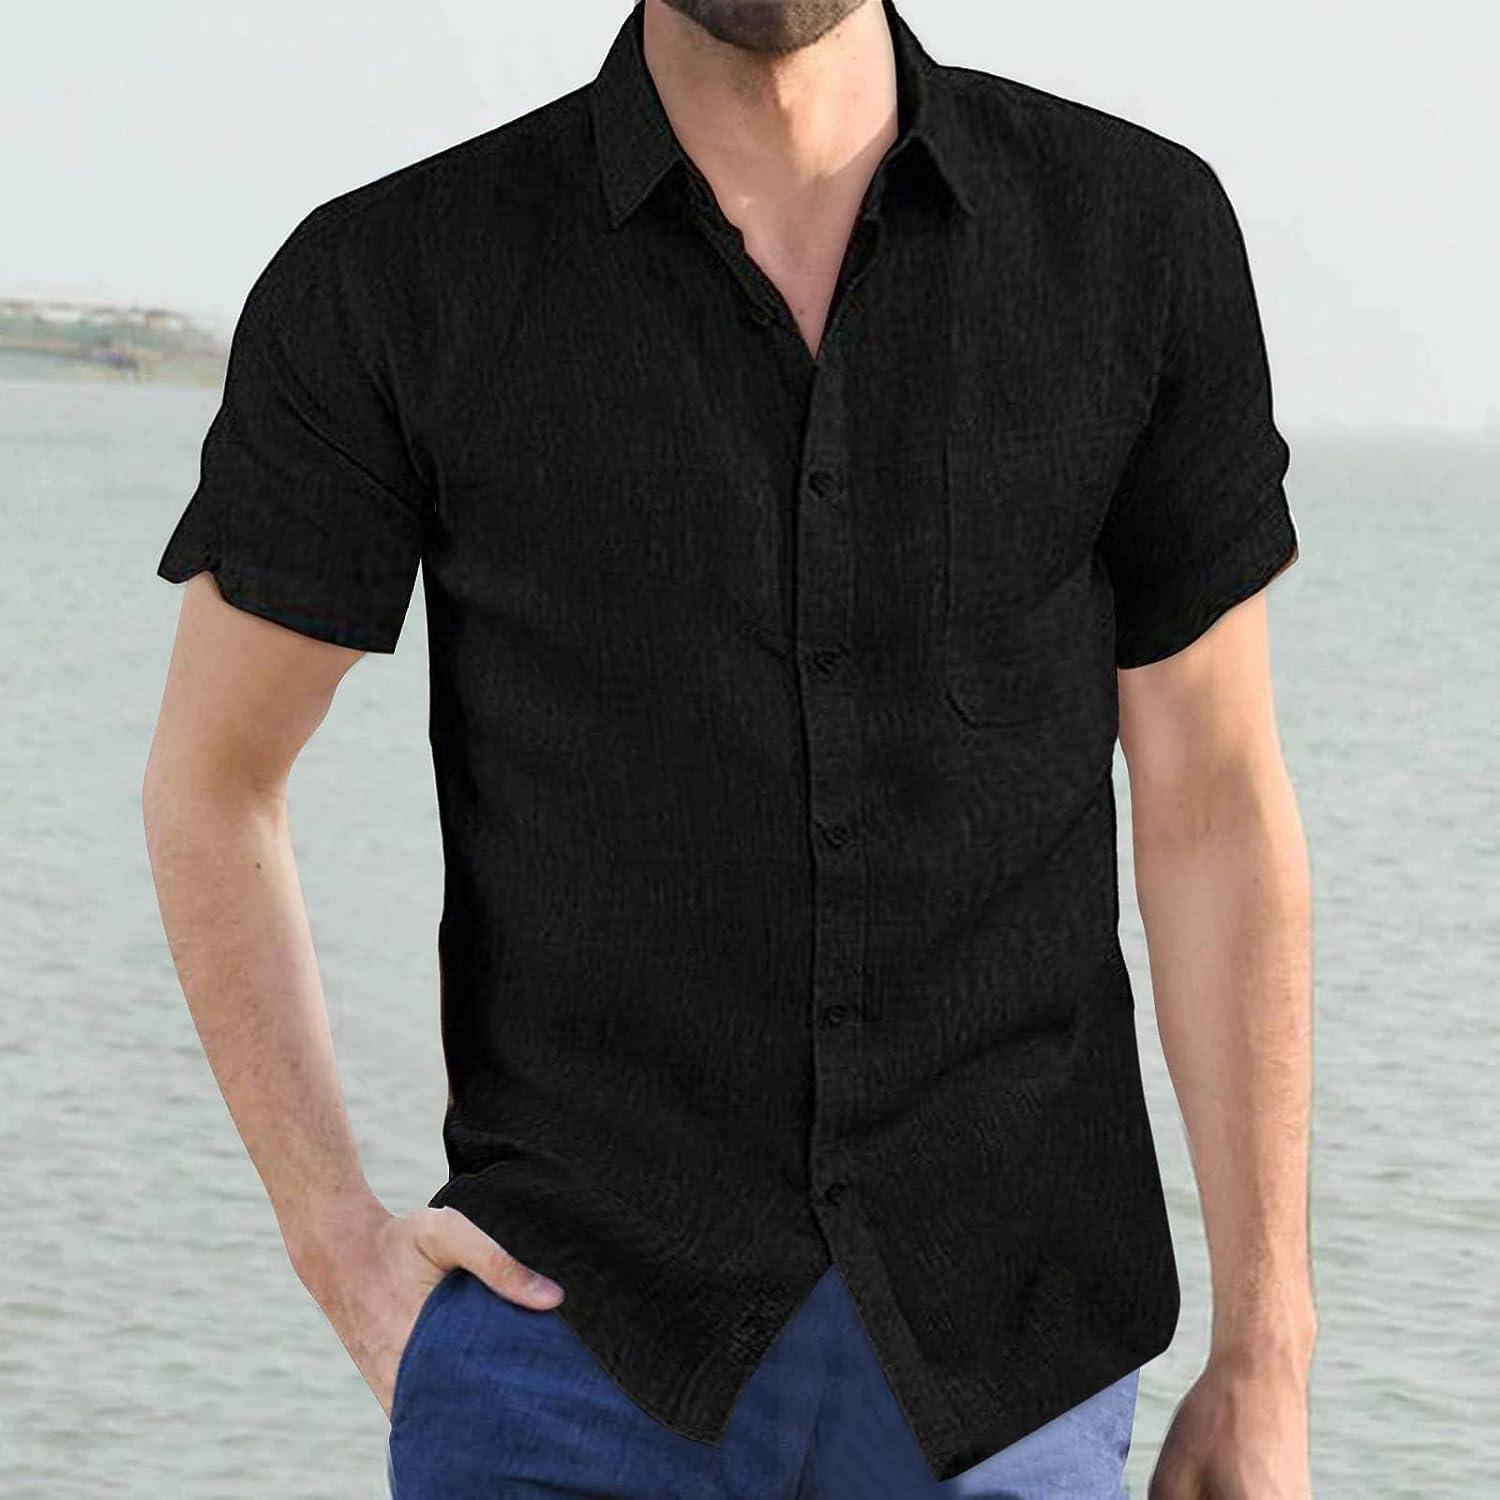 Linen Long Sleeve Hooded Shirts for Men Beach Casual Tops Spring Summer  Tees Lace-Up Button-Down Solid T-Shirts